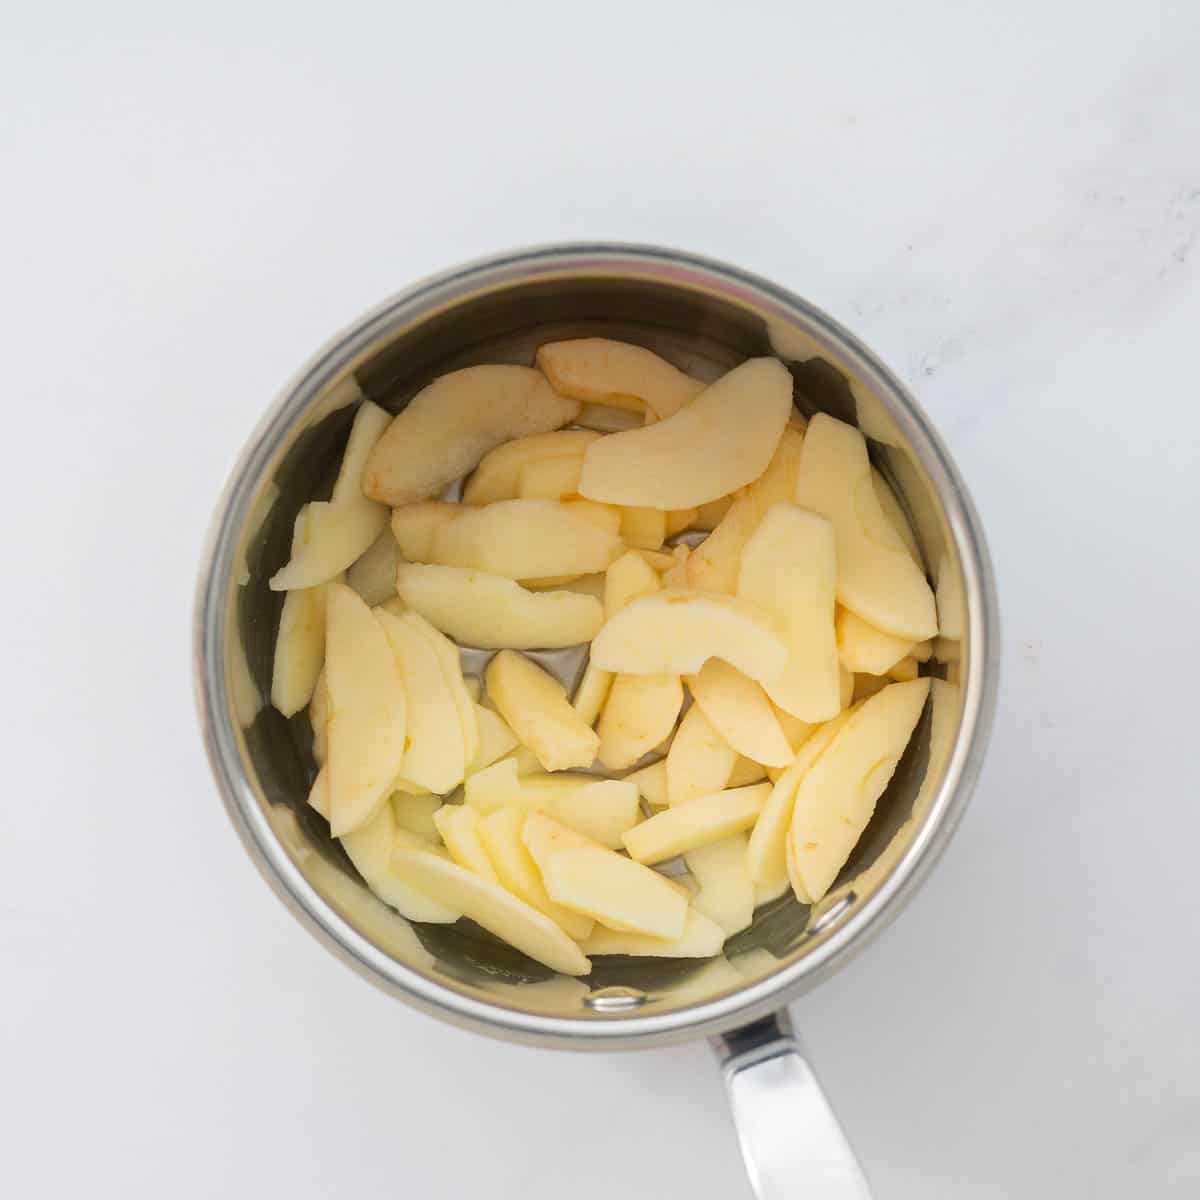 Apple slices in a small sauce pan.